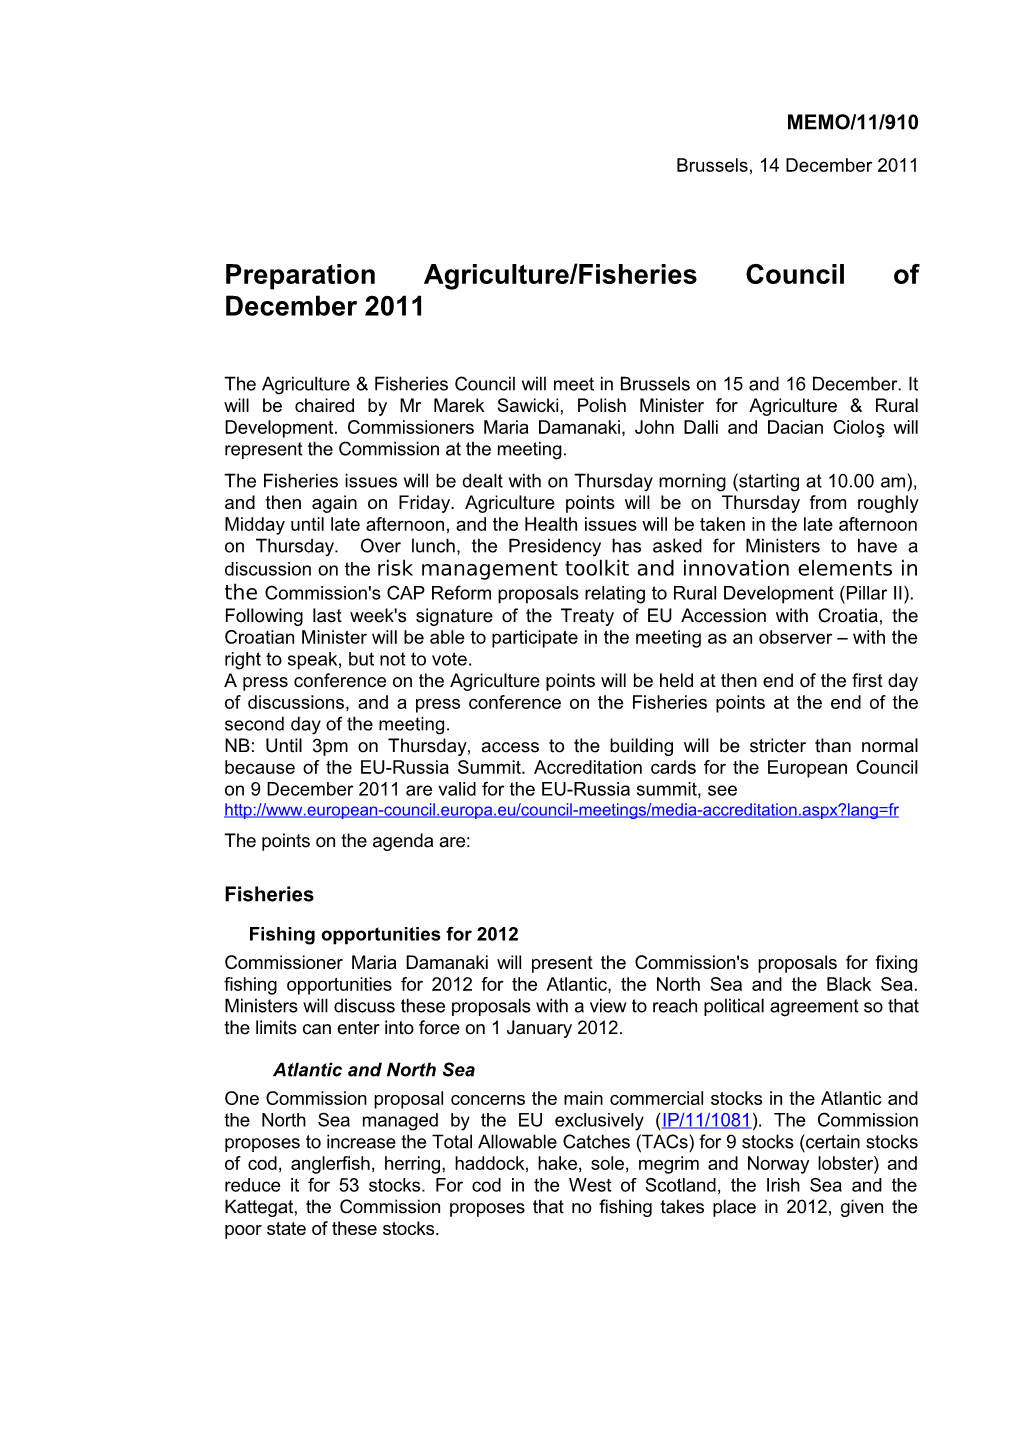 Preparation Agriculture/Fisheries Council of December 2011